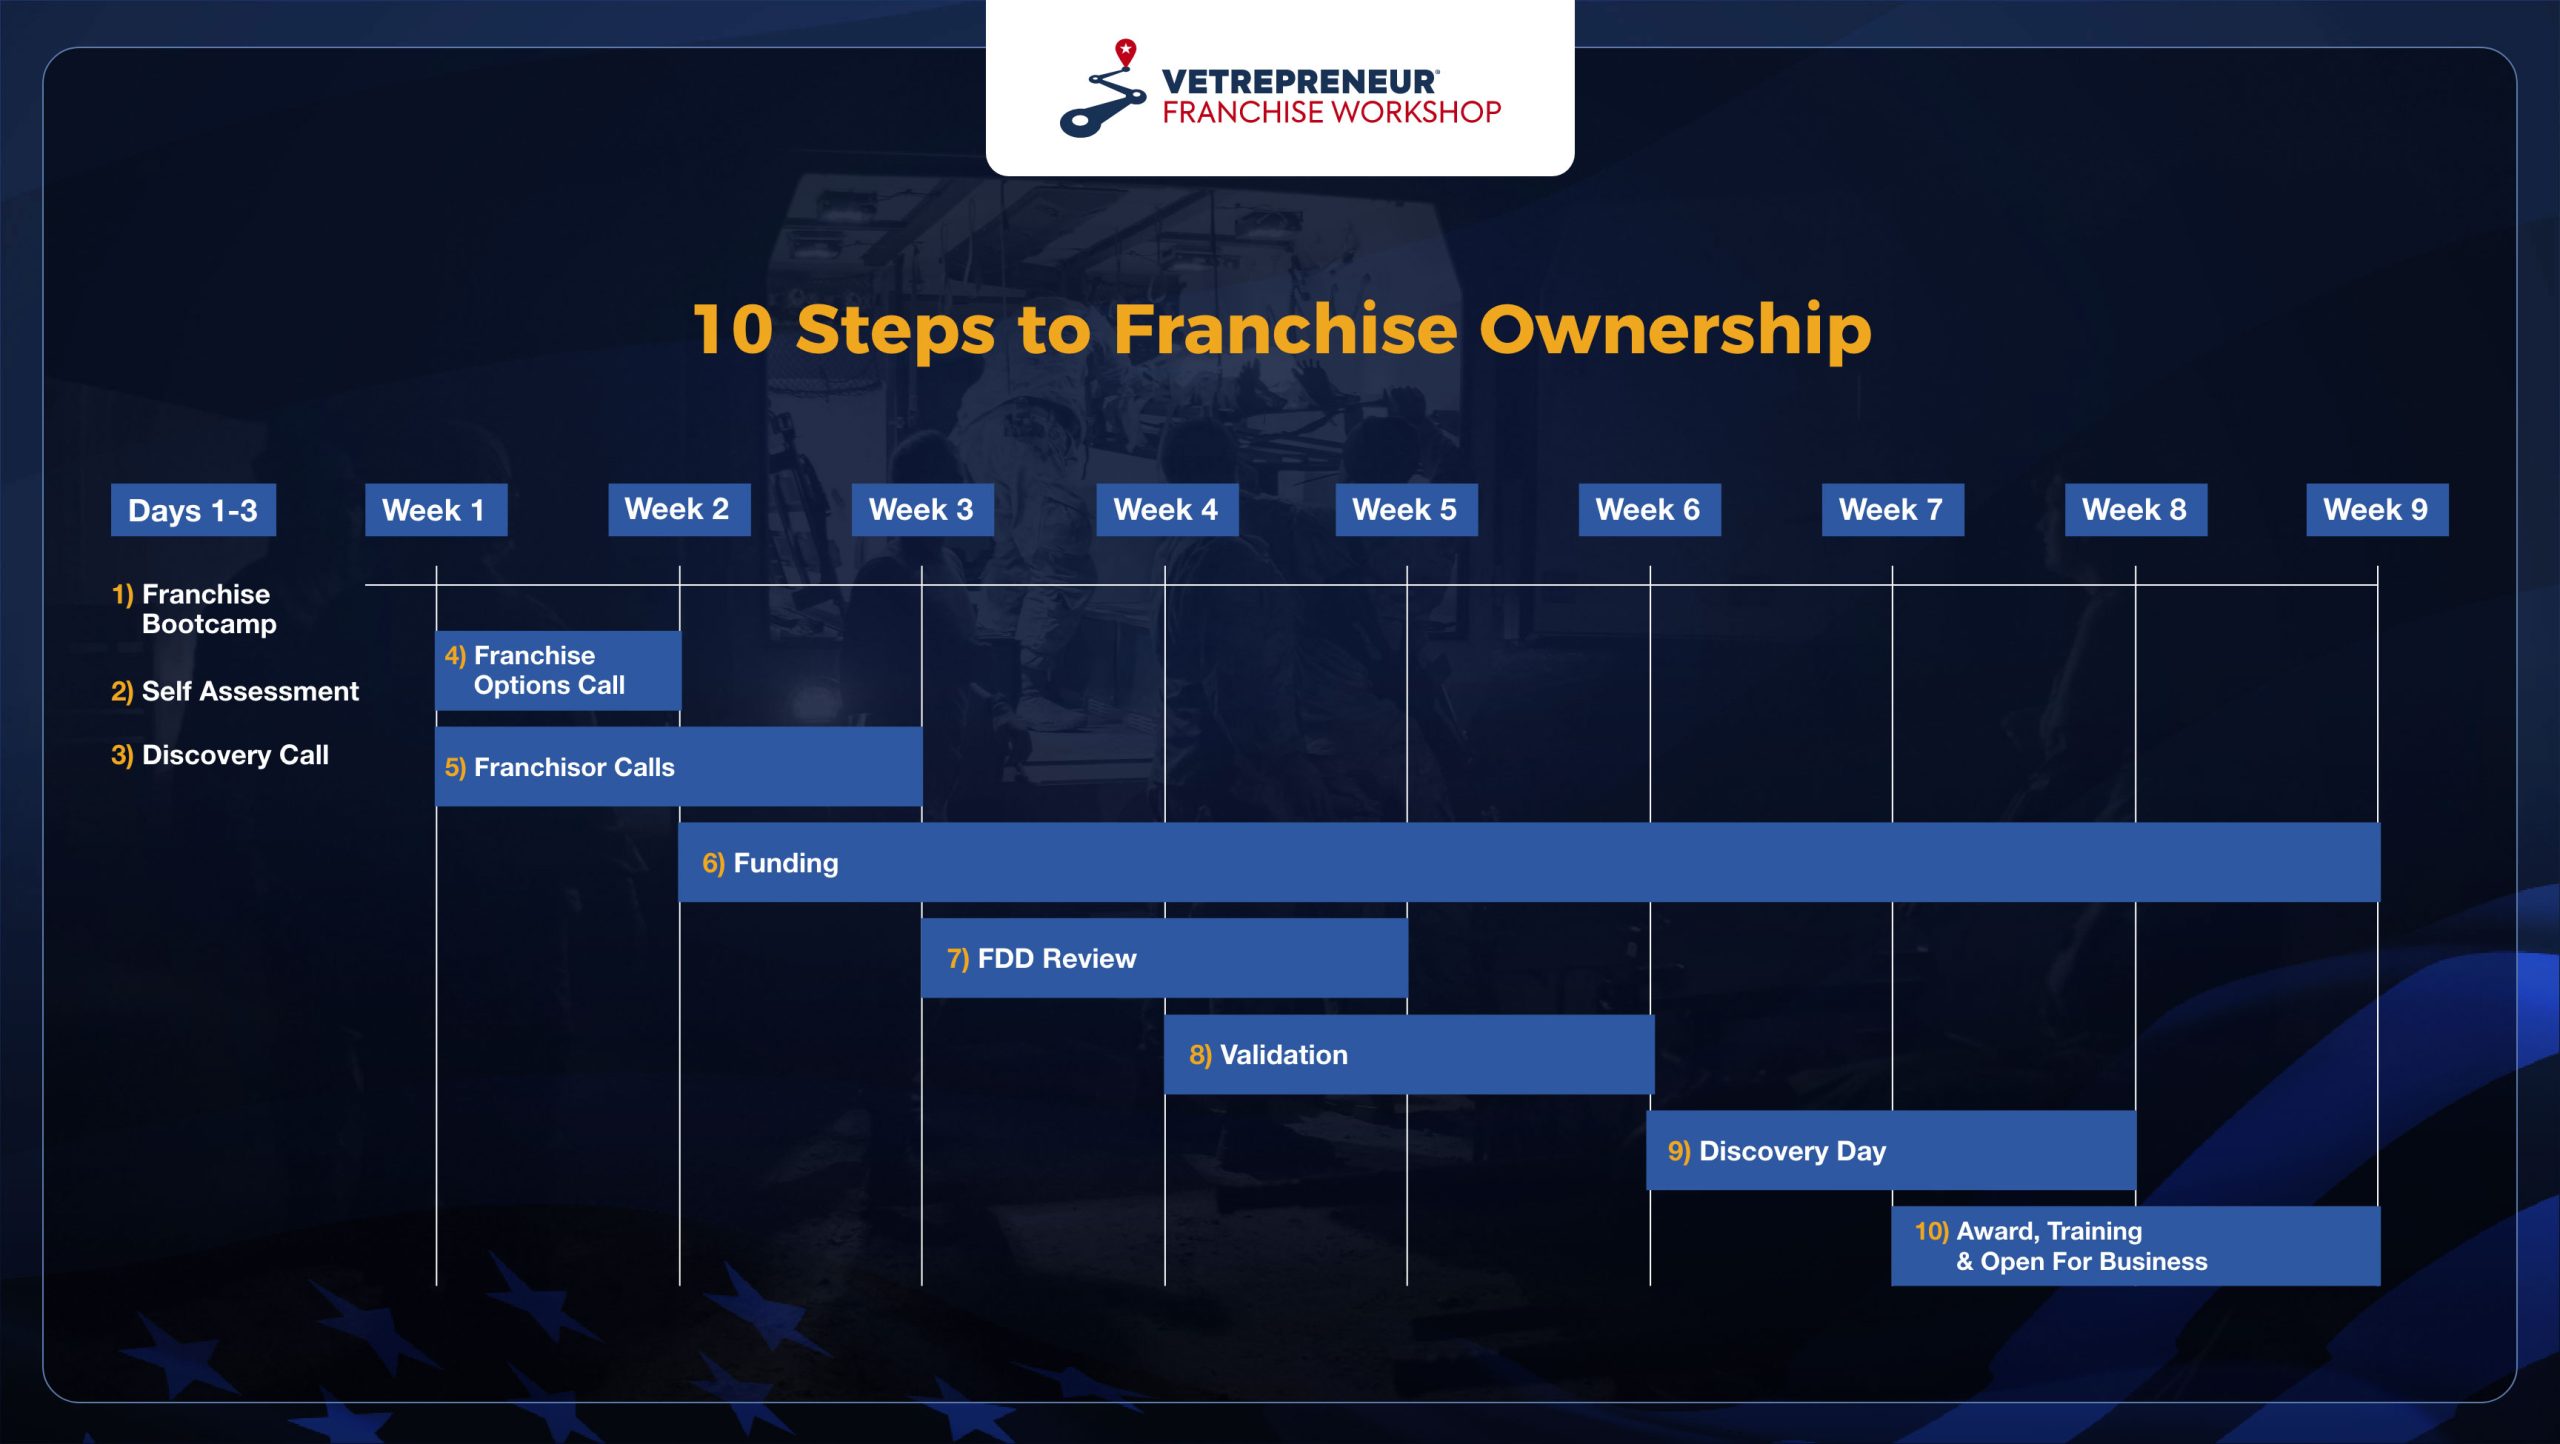 10 Steps to Franchise Ownership